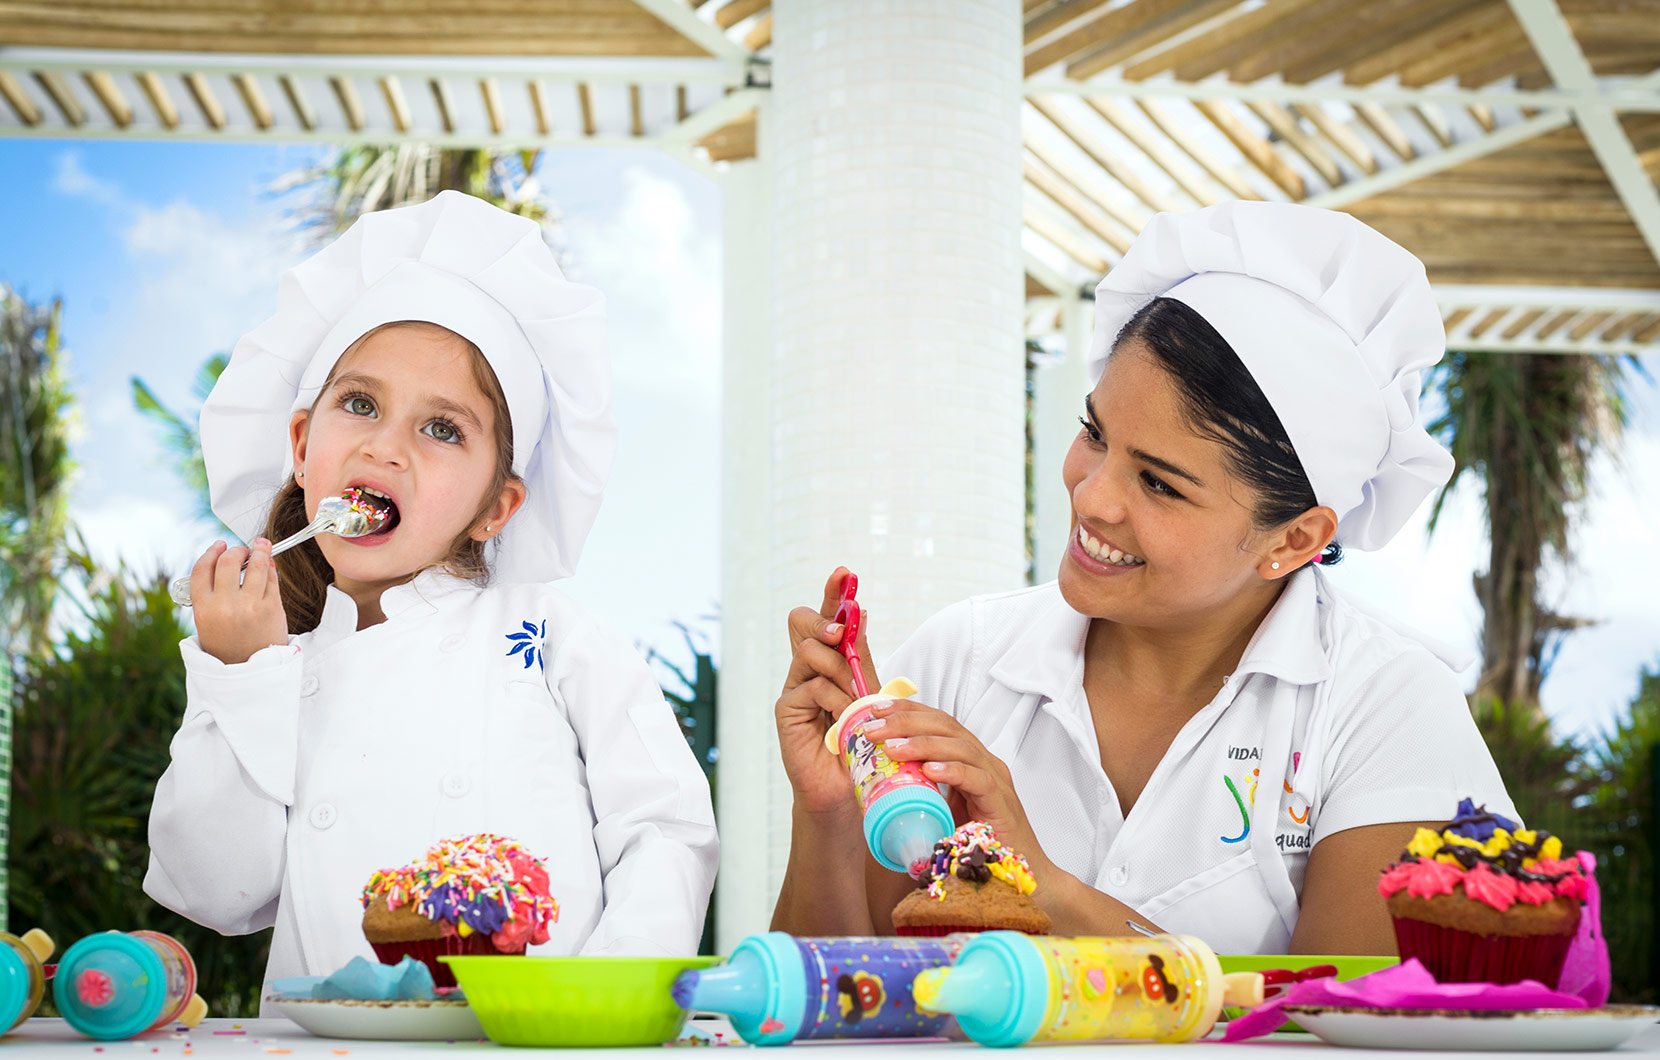 Kids can try their hand at being a pastry chef with the Top Chef Jr. Program.